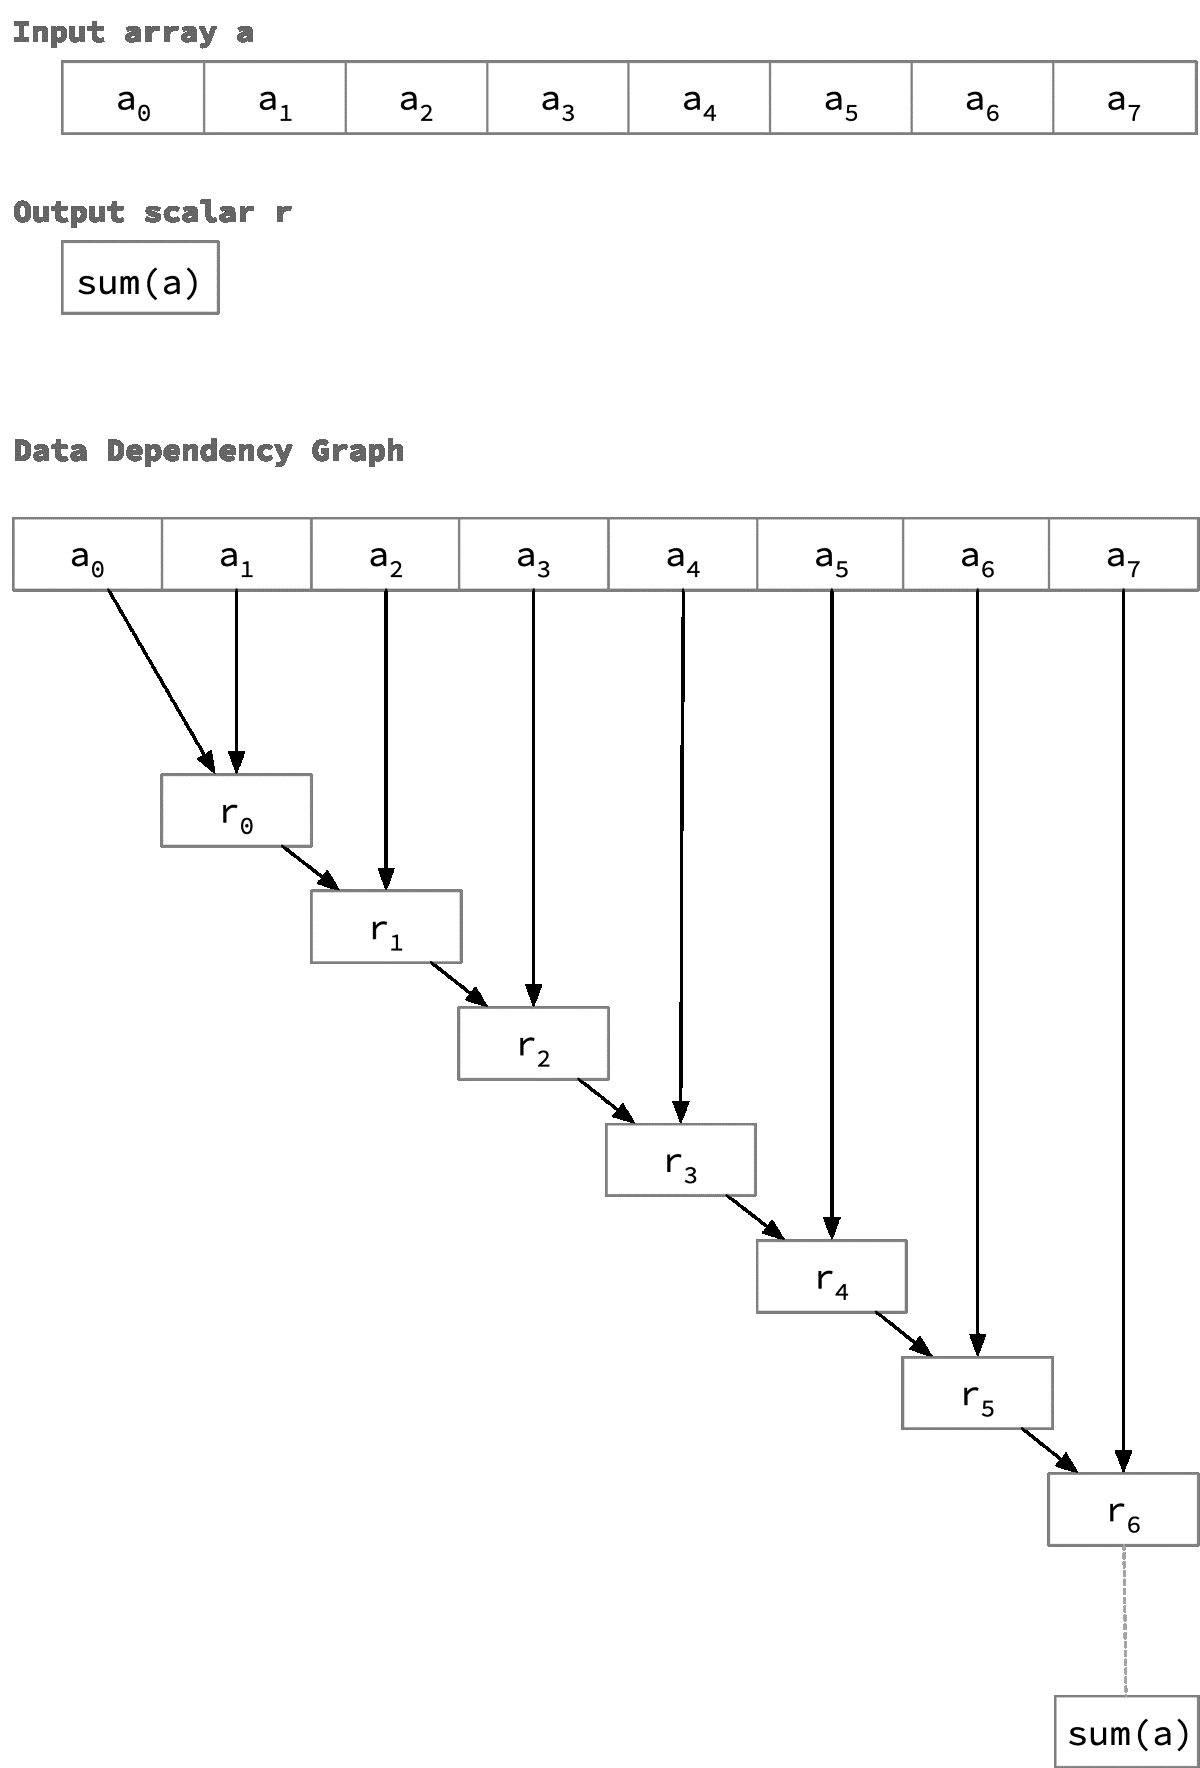 A program accepts an array and computes a scalar sum of the array elements. In this implementation, each computation depends on the result obtained for the prior computation, so the computation cannot be usefully parallelized.